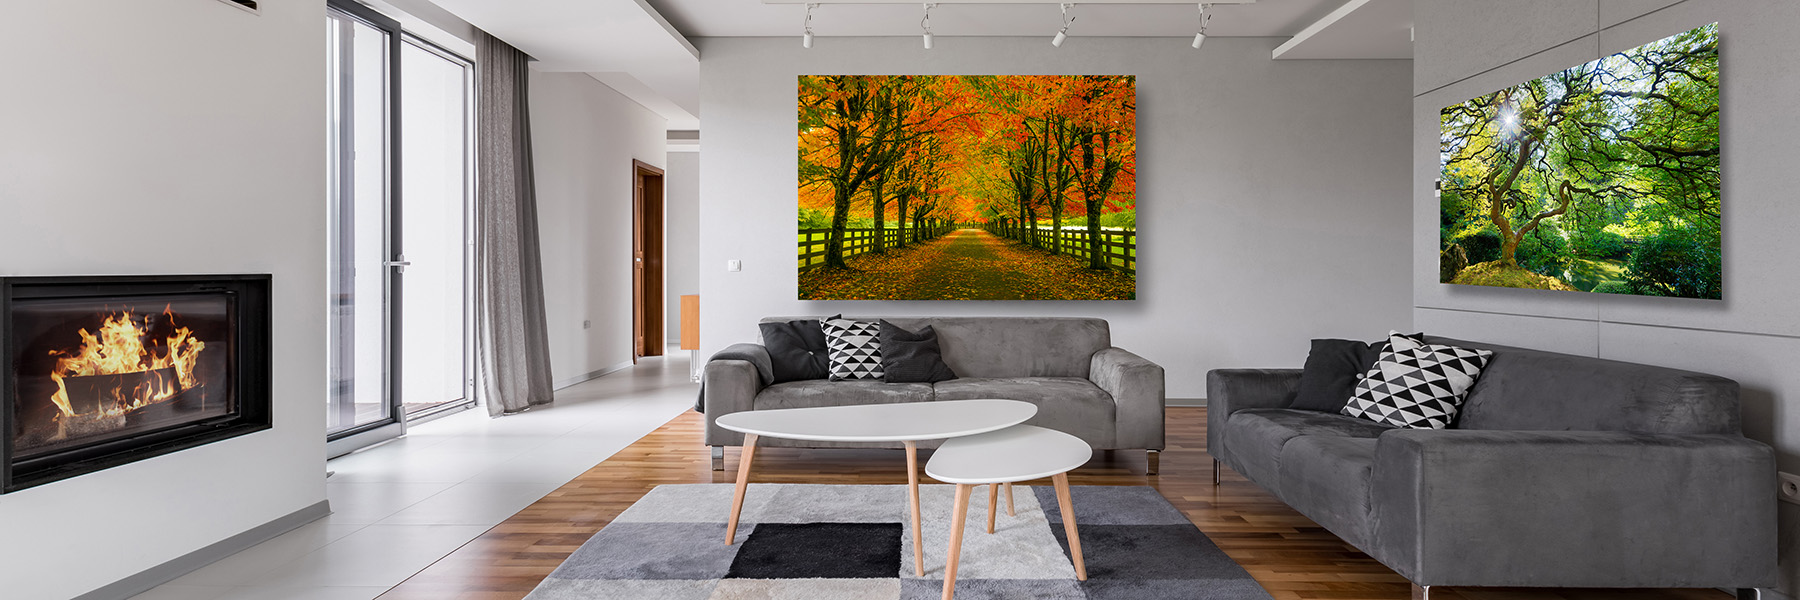 A home displaying Jason Ferrell photography prints on the wall.   This is an example of the interior design services I offer...